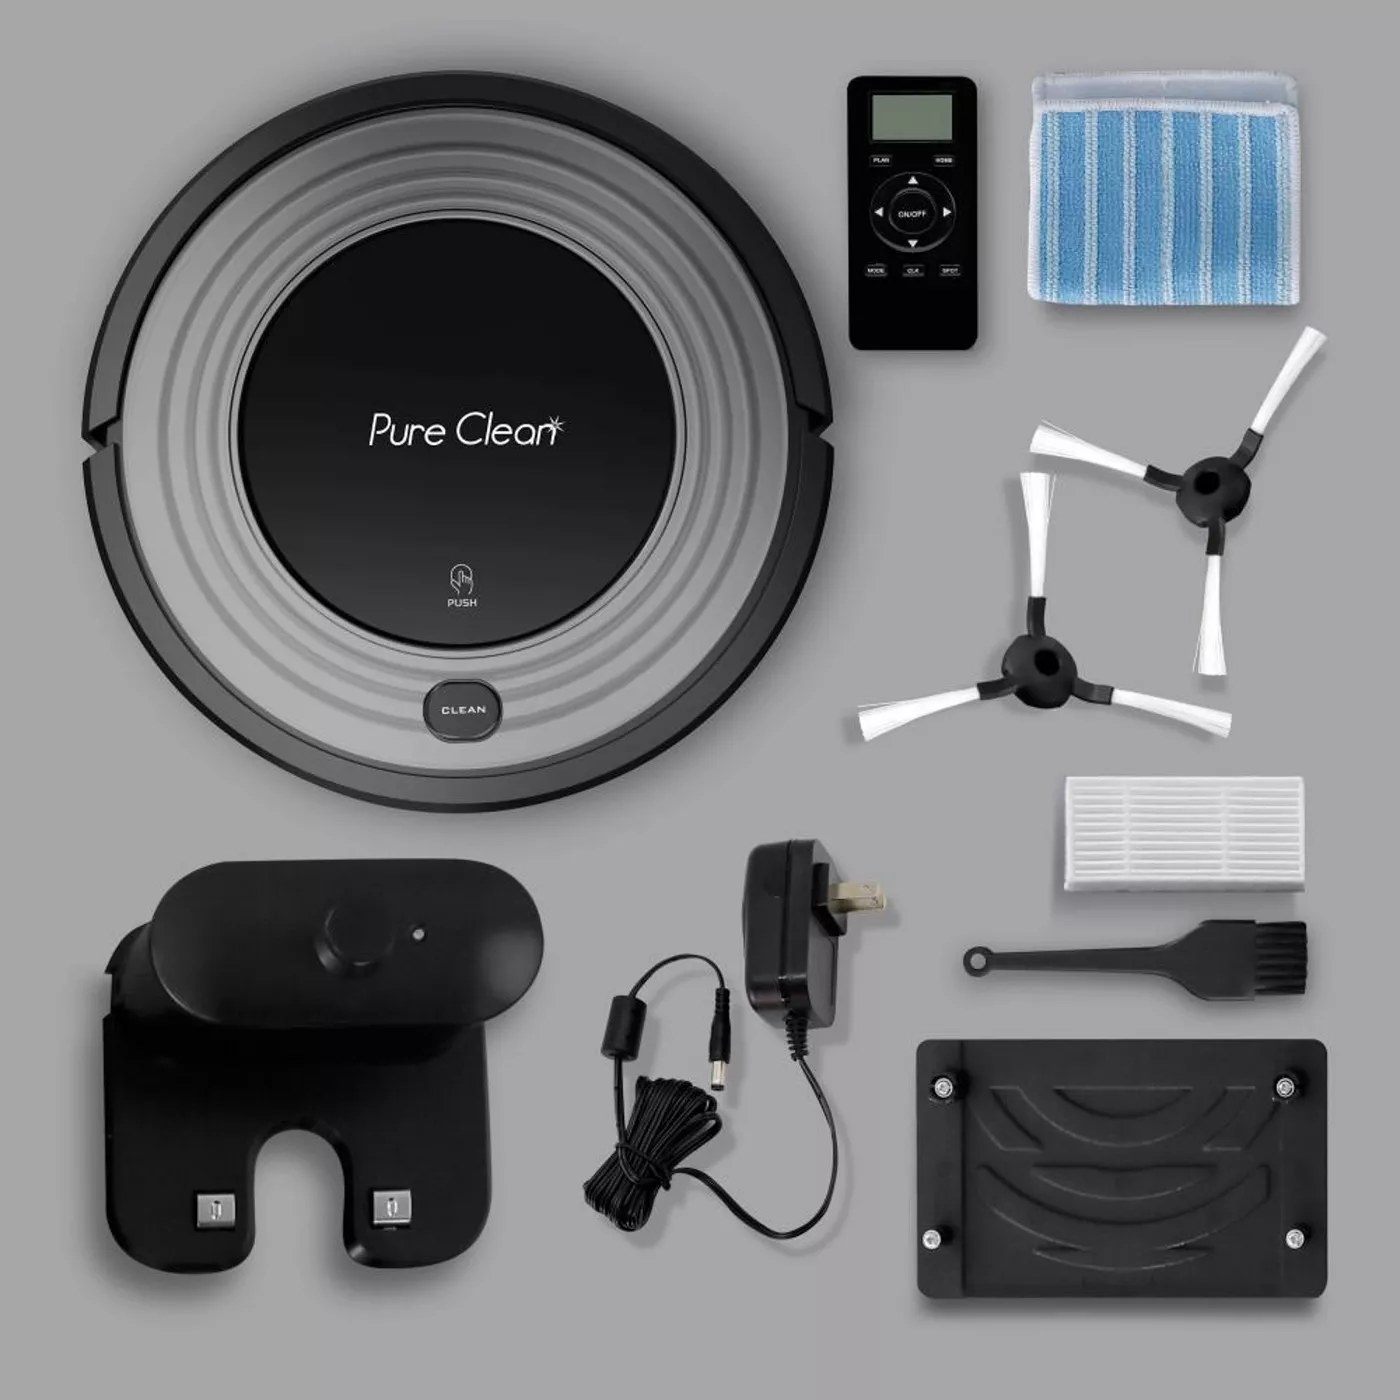 The black Pure Clean robot vacuum and accompanying accessories